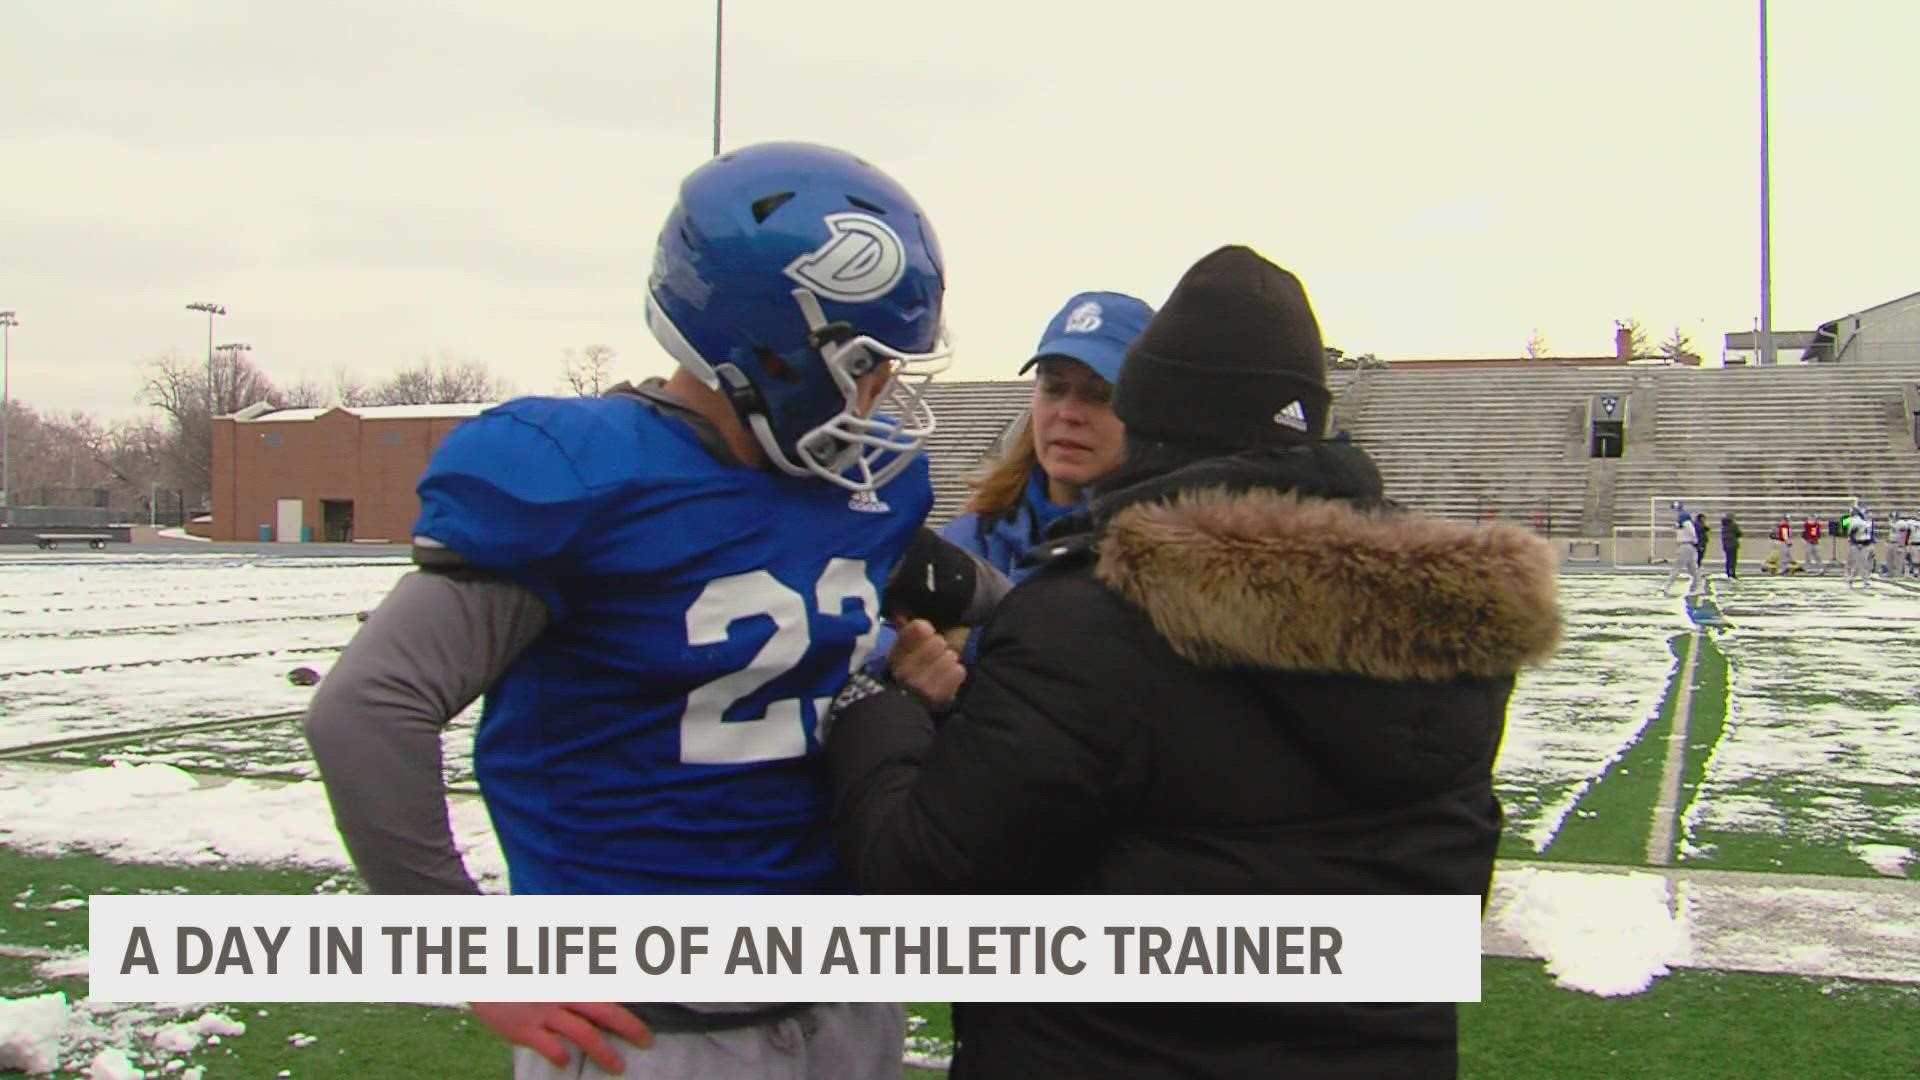 You see them on the sidelines at games, but do you really know all the work athletic trainers put in behinds the scenes to keep athletes healthy?